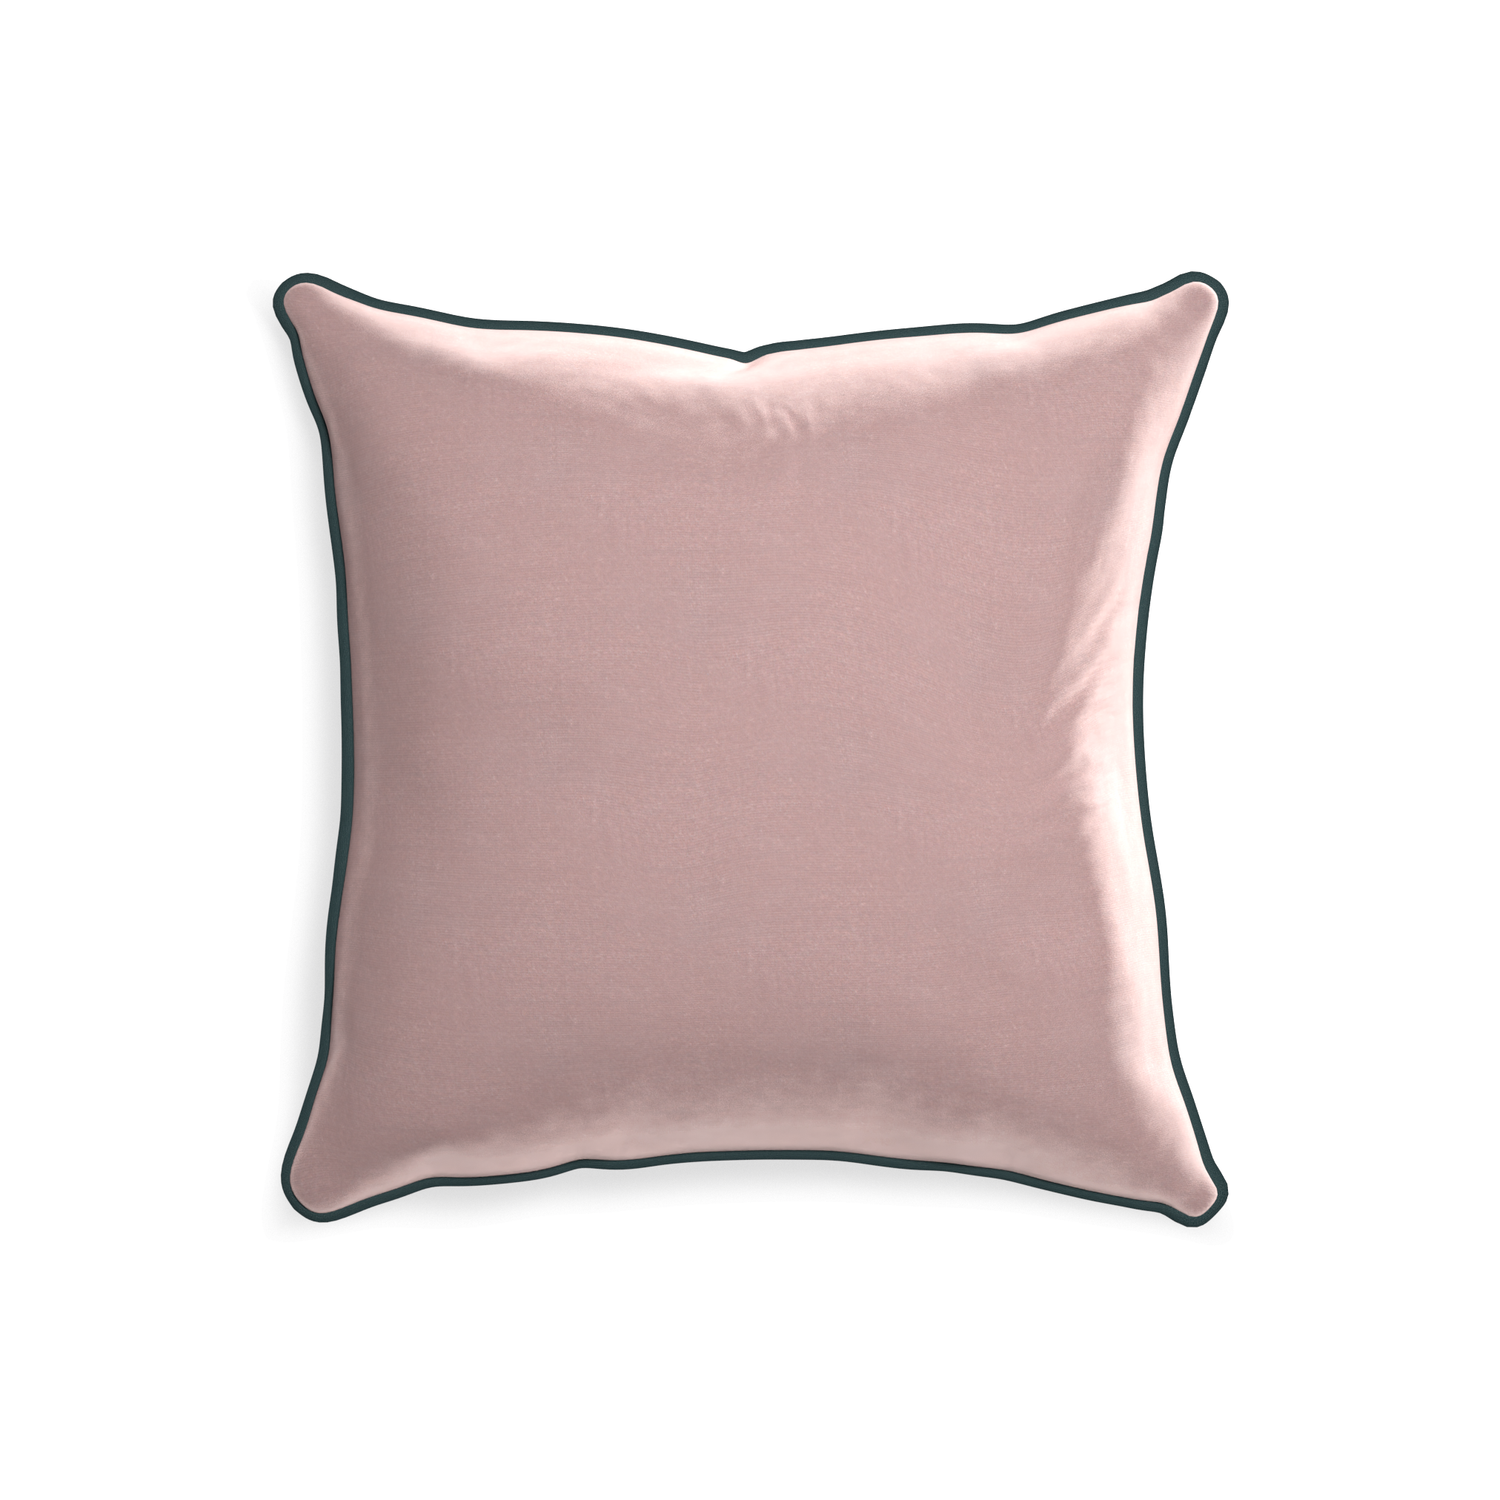 20-square mauve velvet custom mauvepillow with p piping on white background